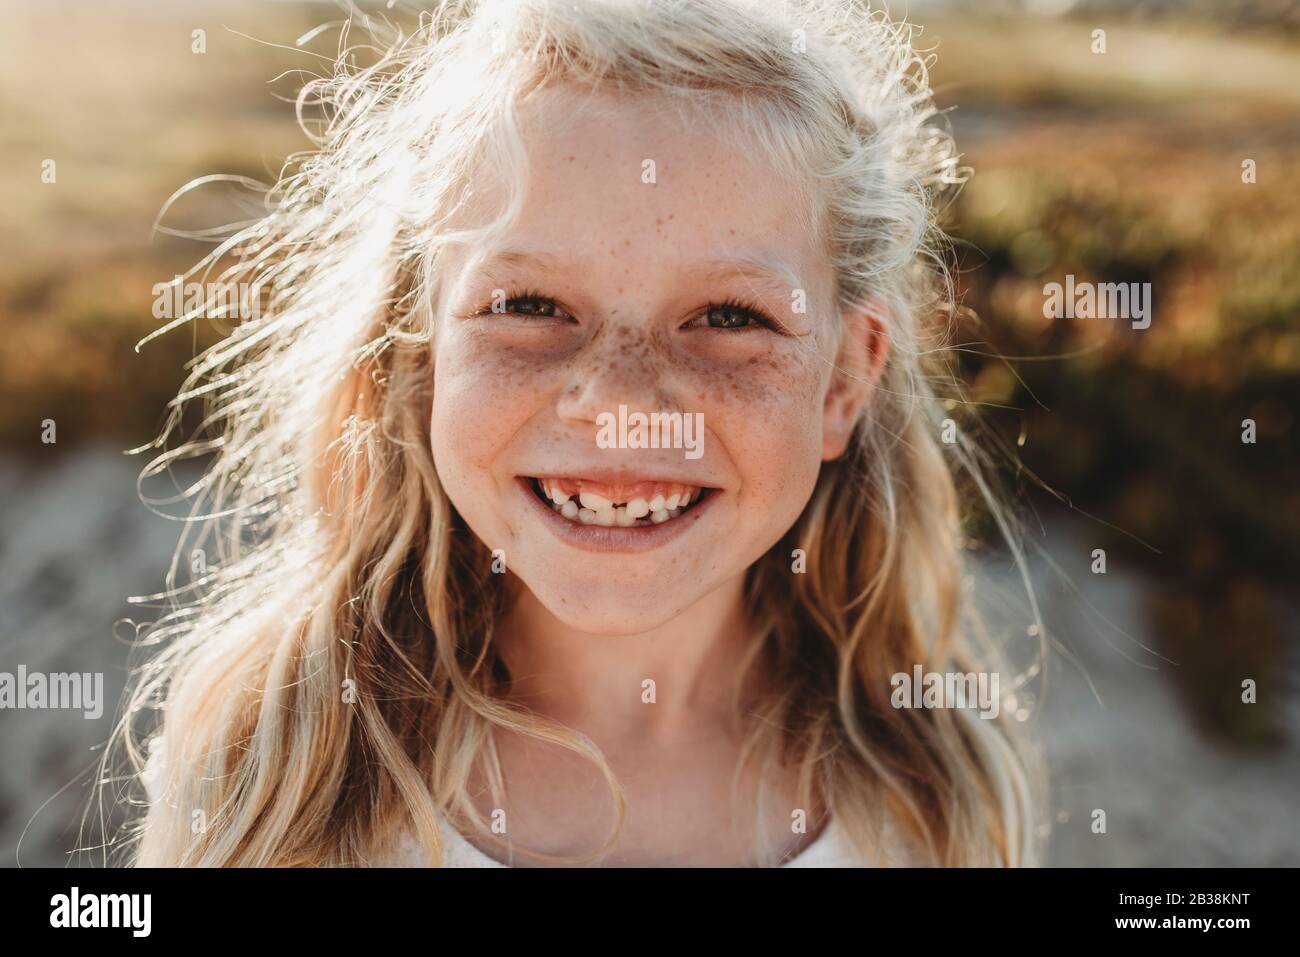 Close up Portrait of young school age girl with freckles smiling Stock Photo